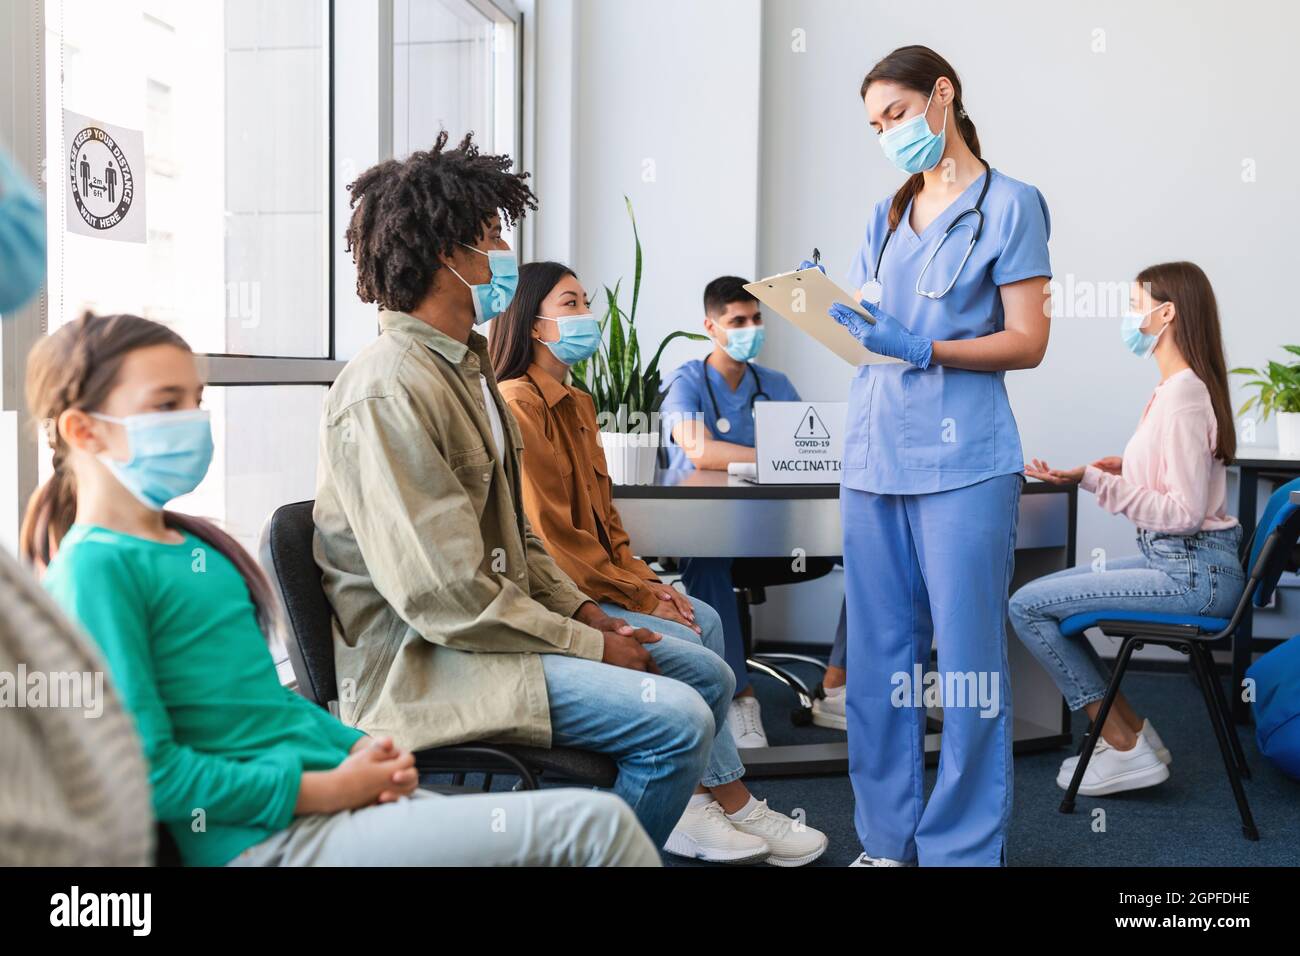 Diverse Patients Waiting For Covid-19 Vaccination Sitting In Queue Stock Photo